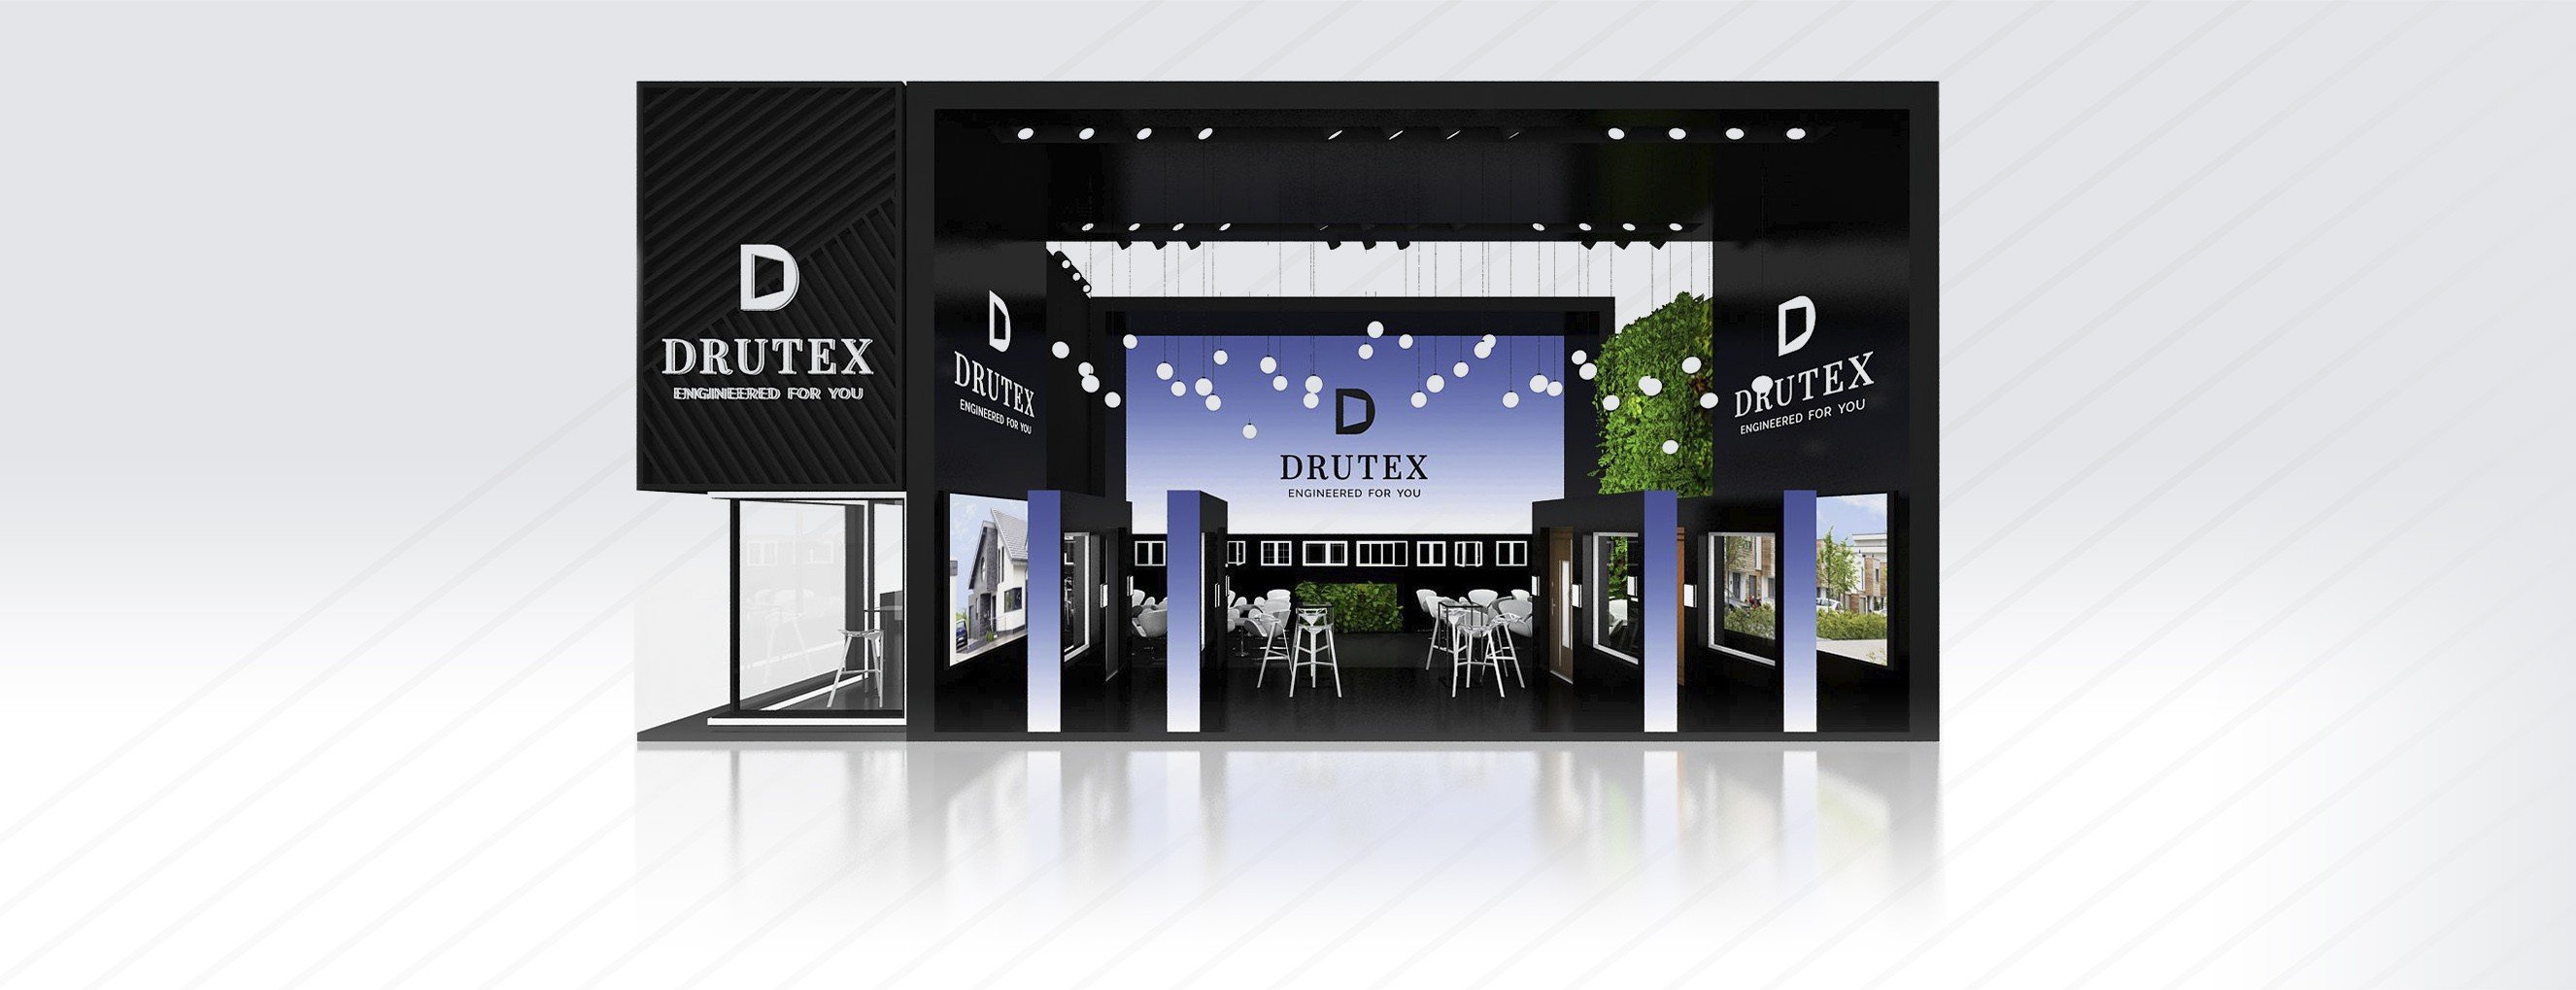 New Drutex products at the Munich trade fair.